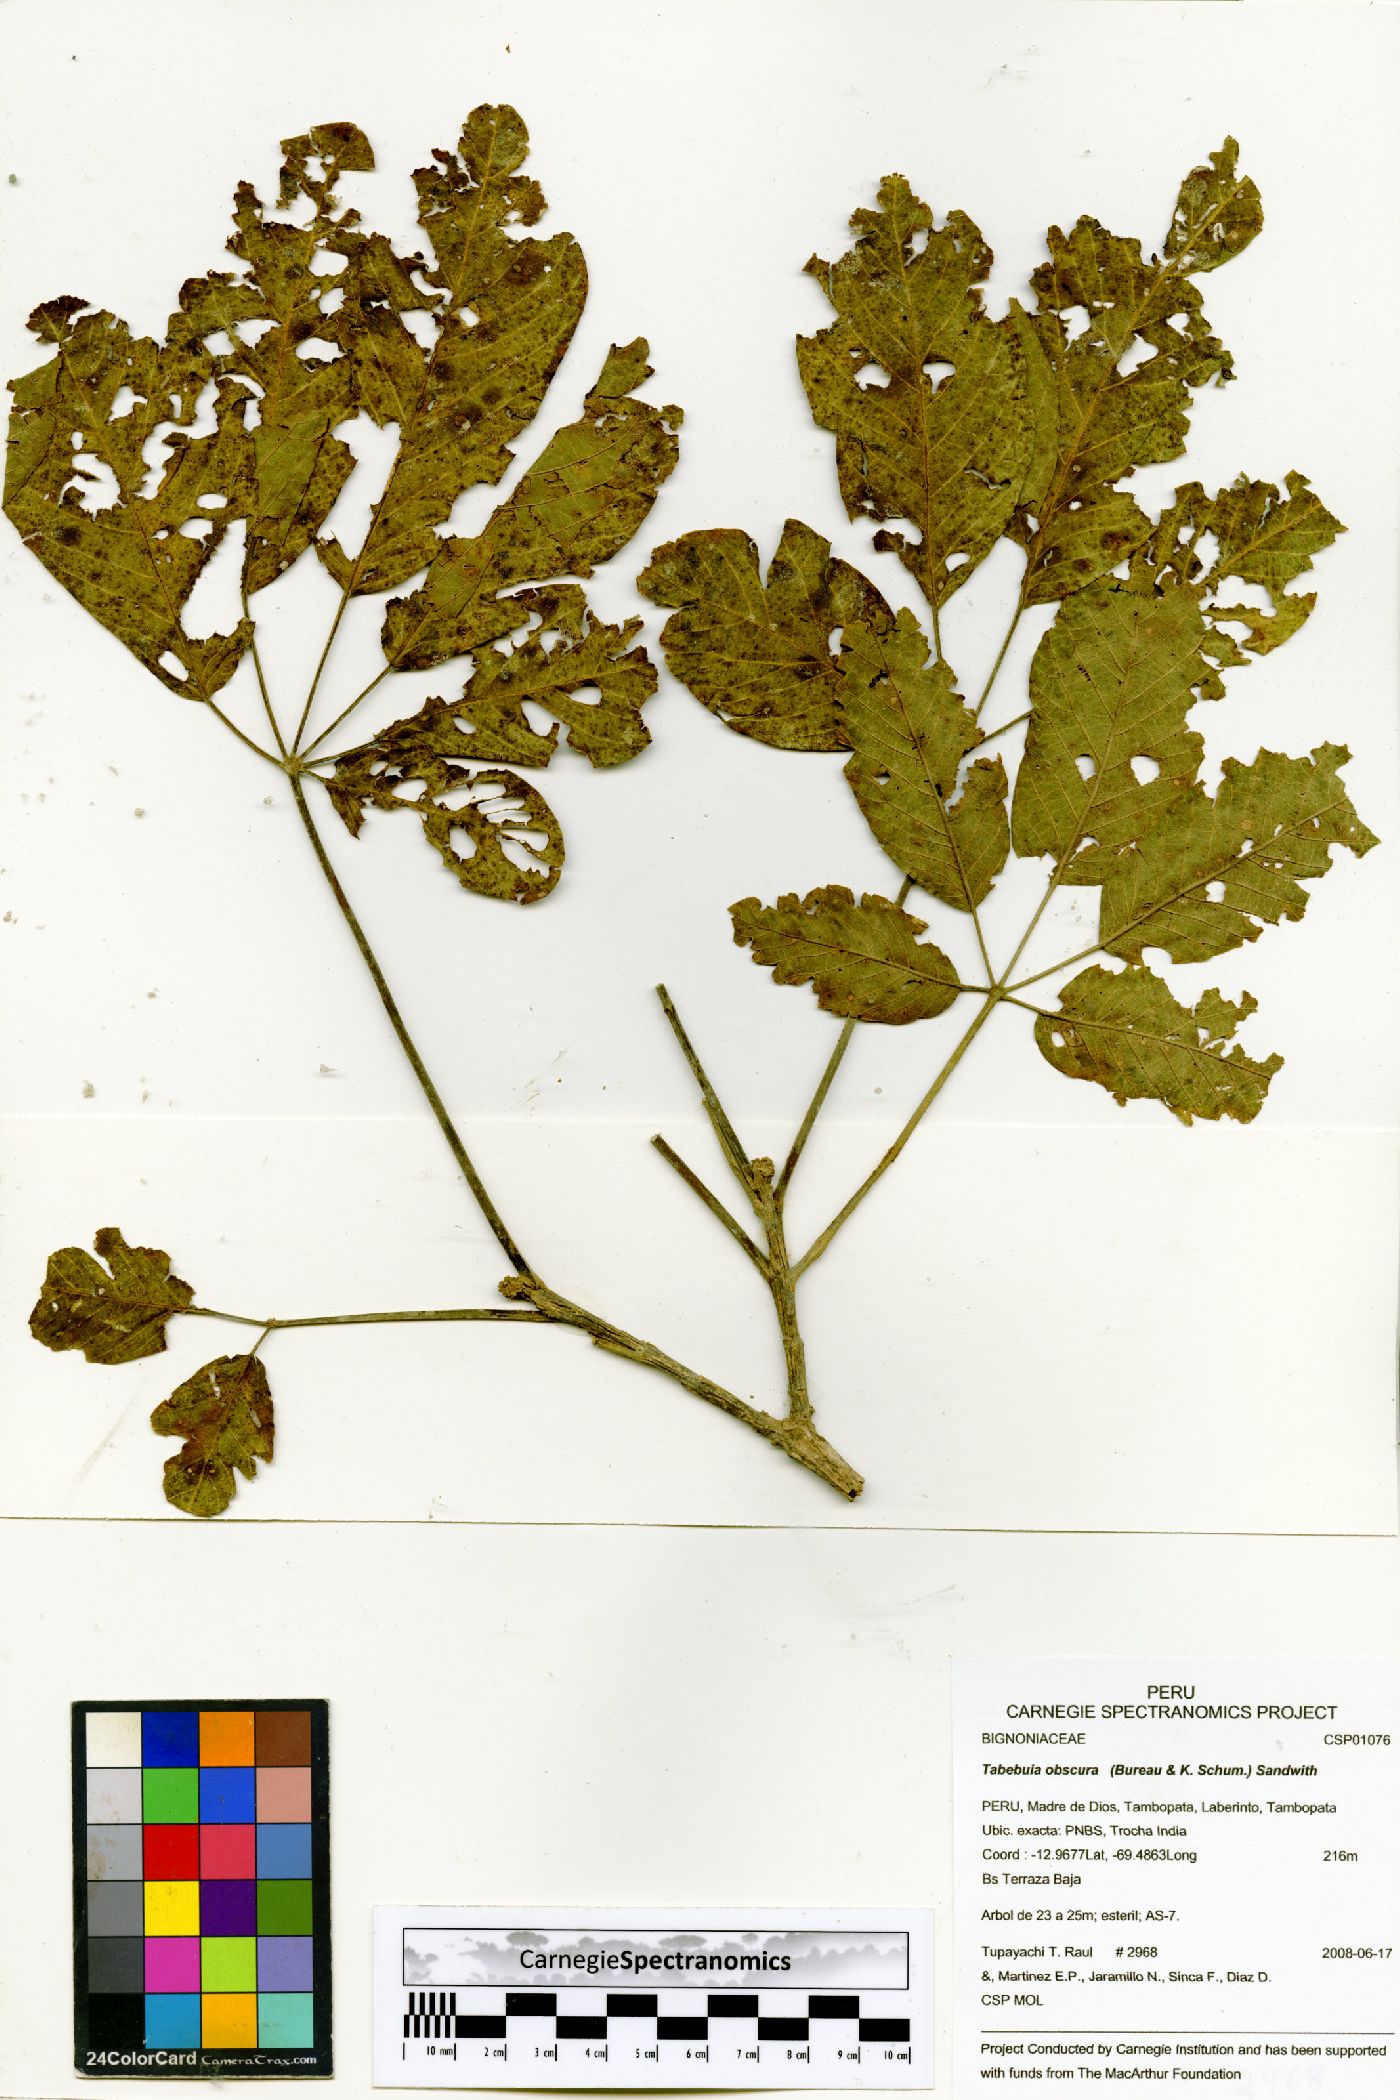 Handroanthus obscurus image